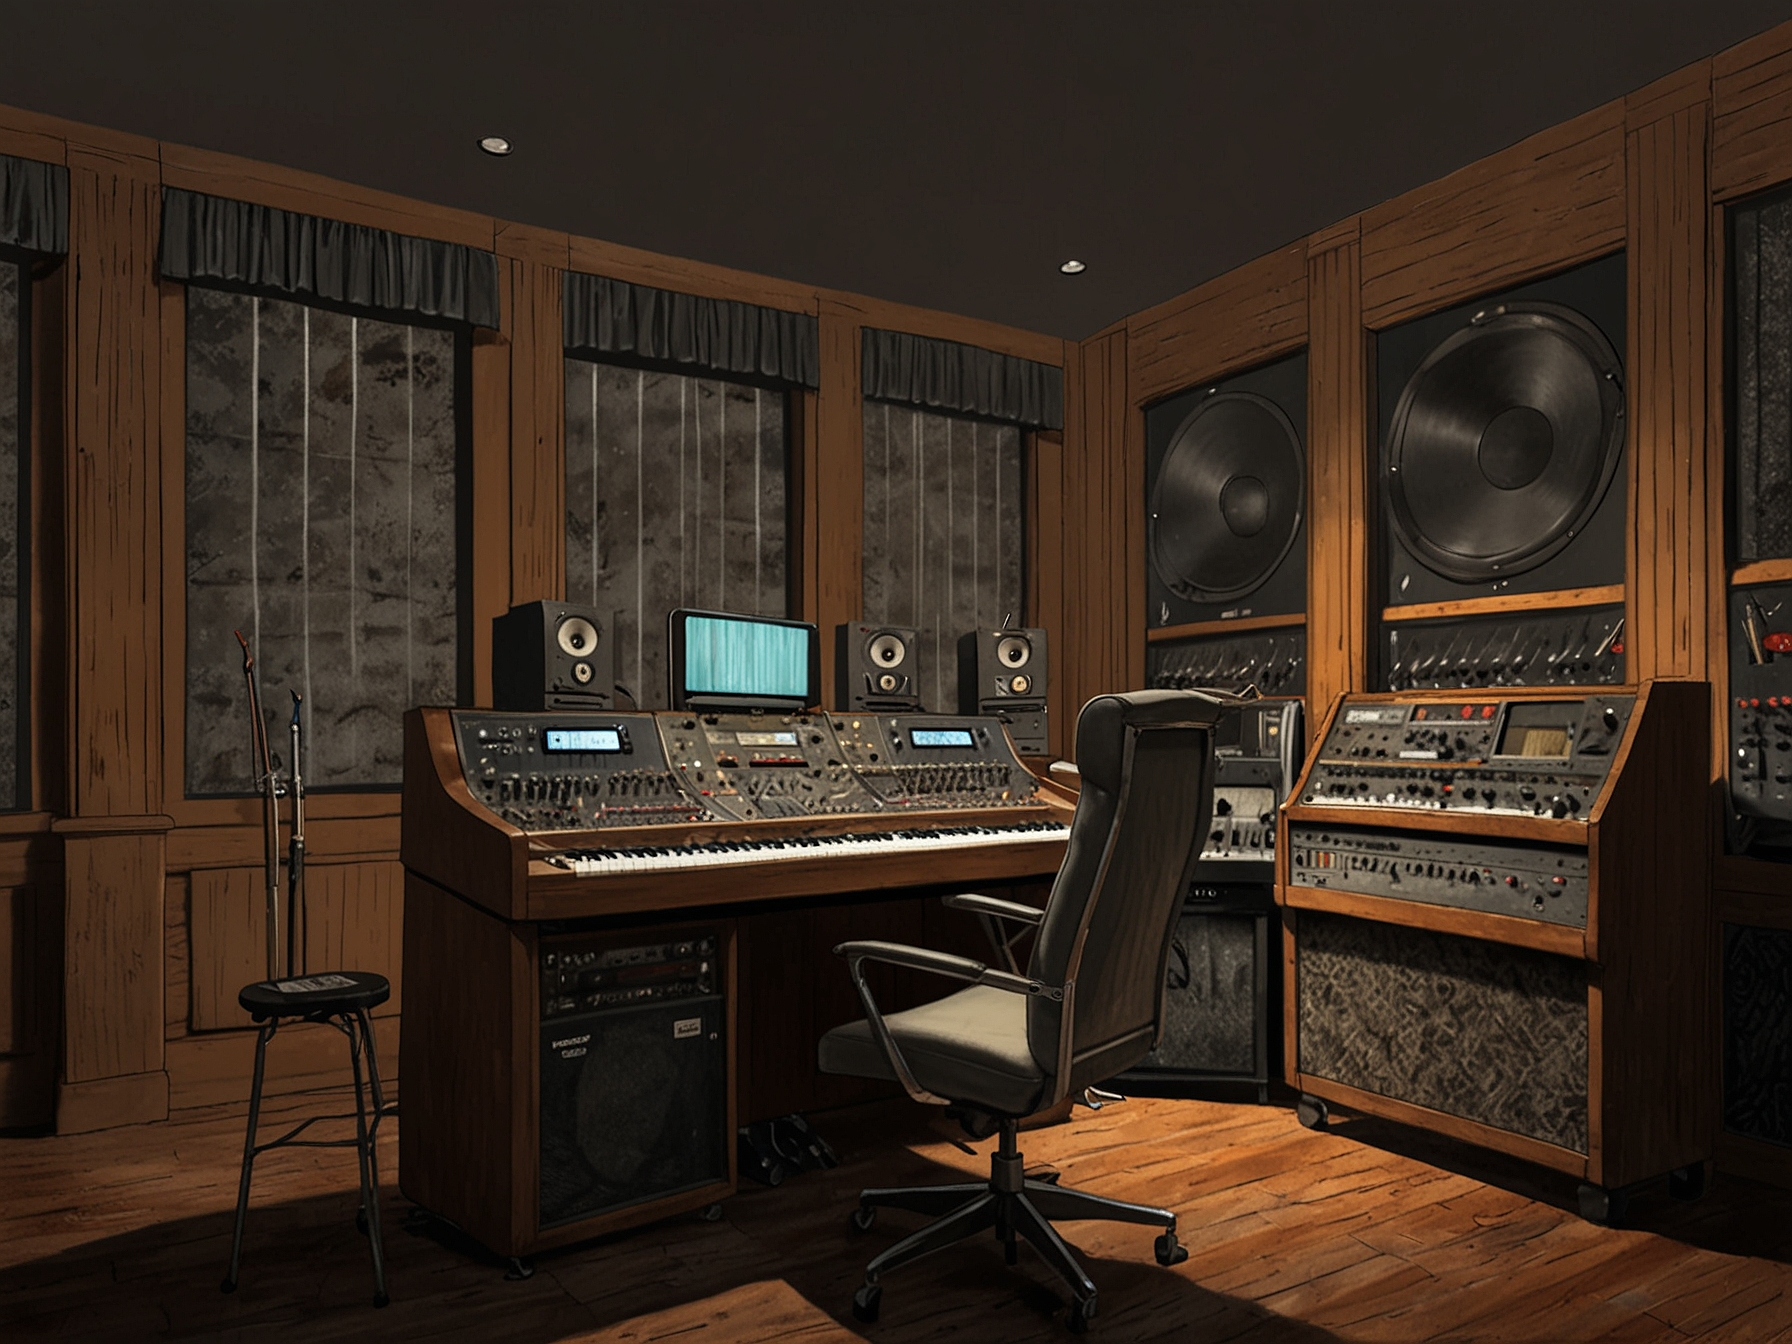 An image of Muscle Shoals' FAME Studios, capturing the historic recording equipment and memorabilia from legendary sessions that shaped the global music industry.